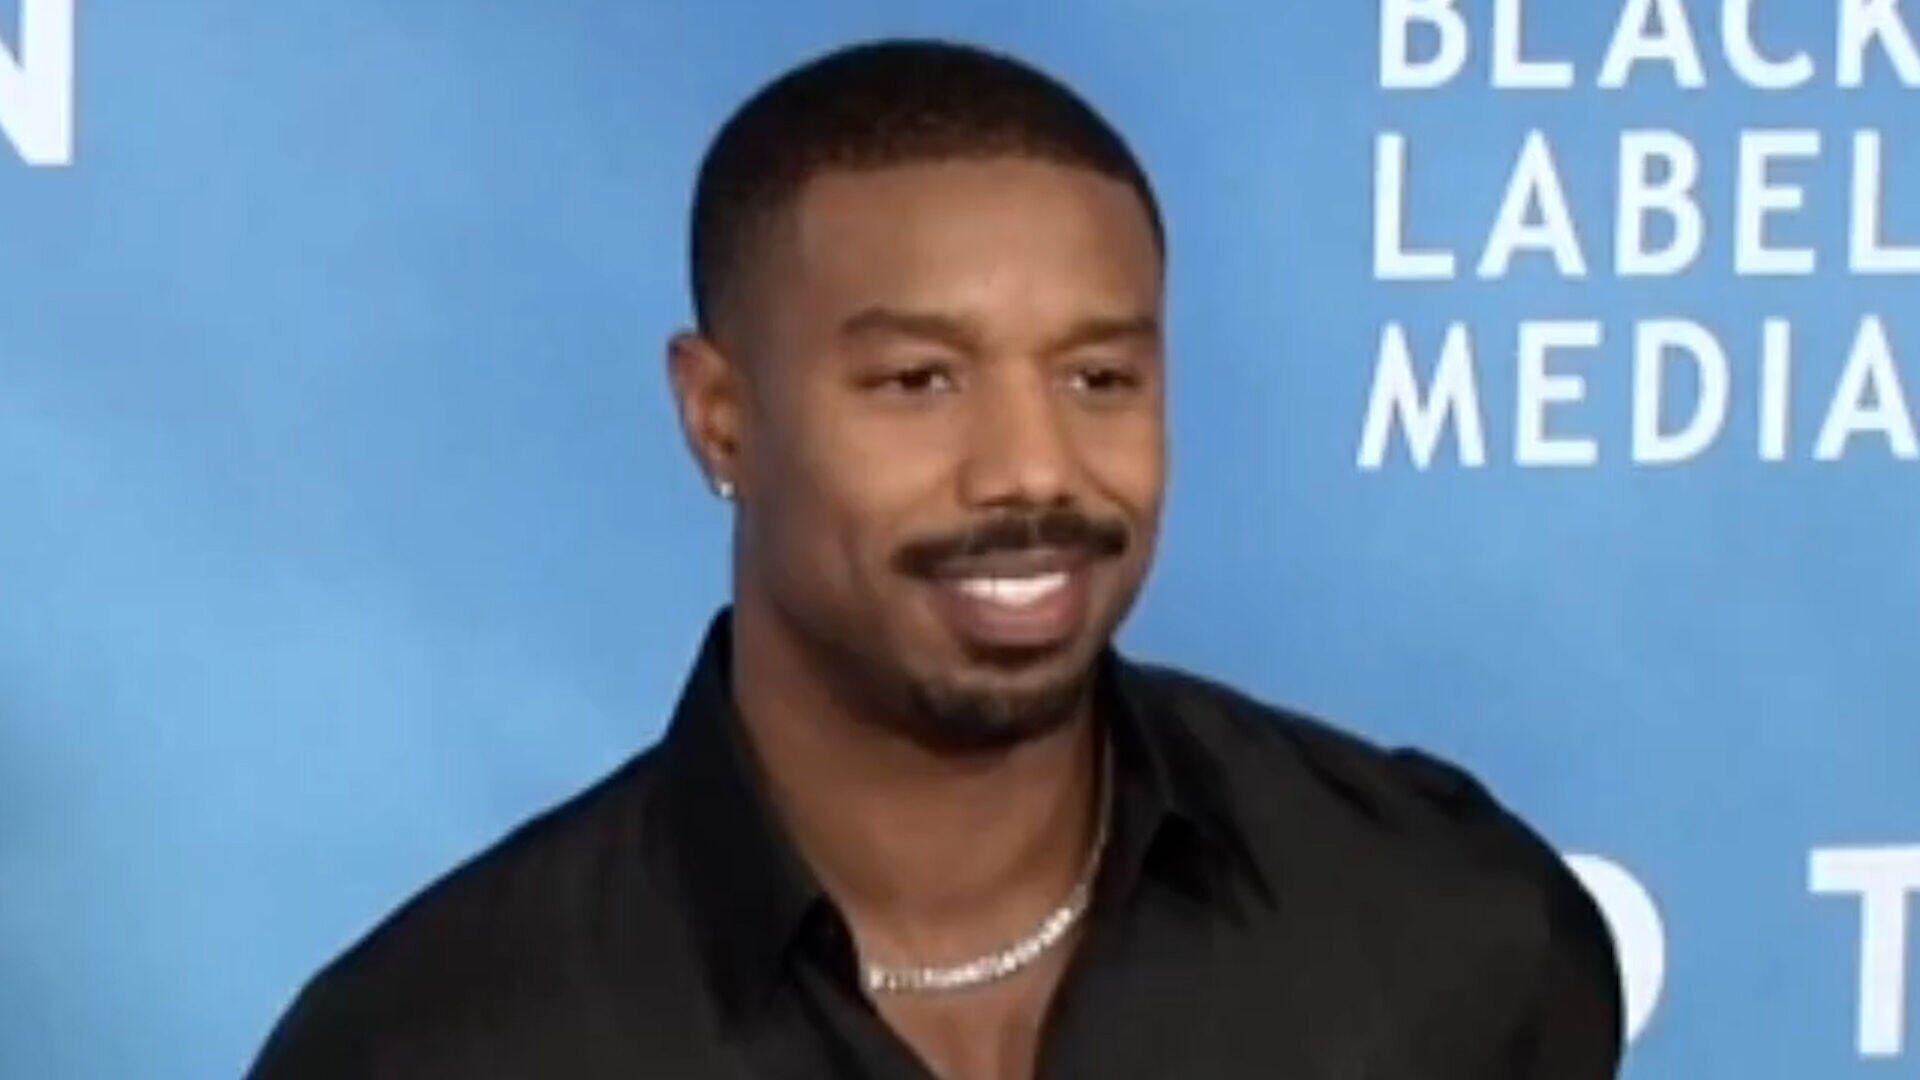 Michael B. Jordan on X: Thanks for the look @ralphlauren tux & @piaget  for keeping me on time!  / X